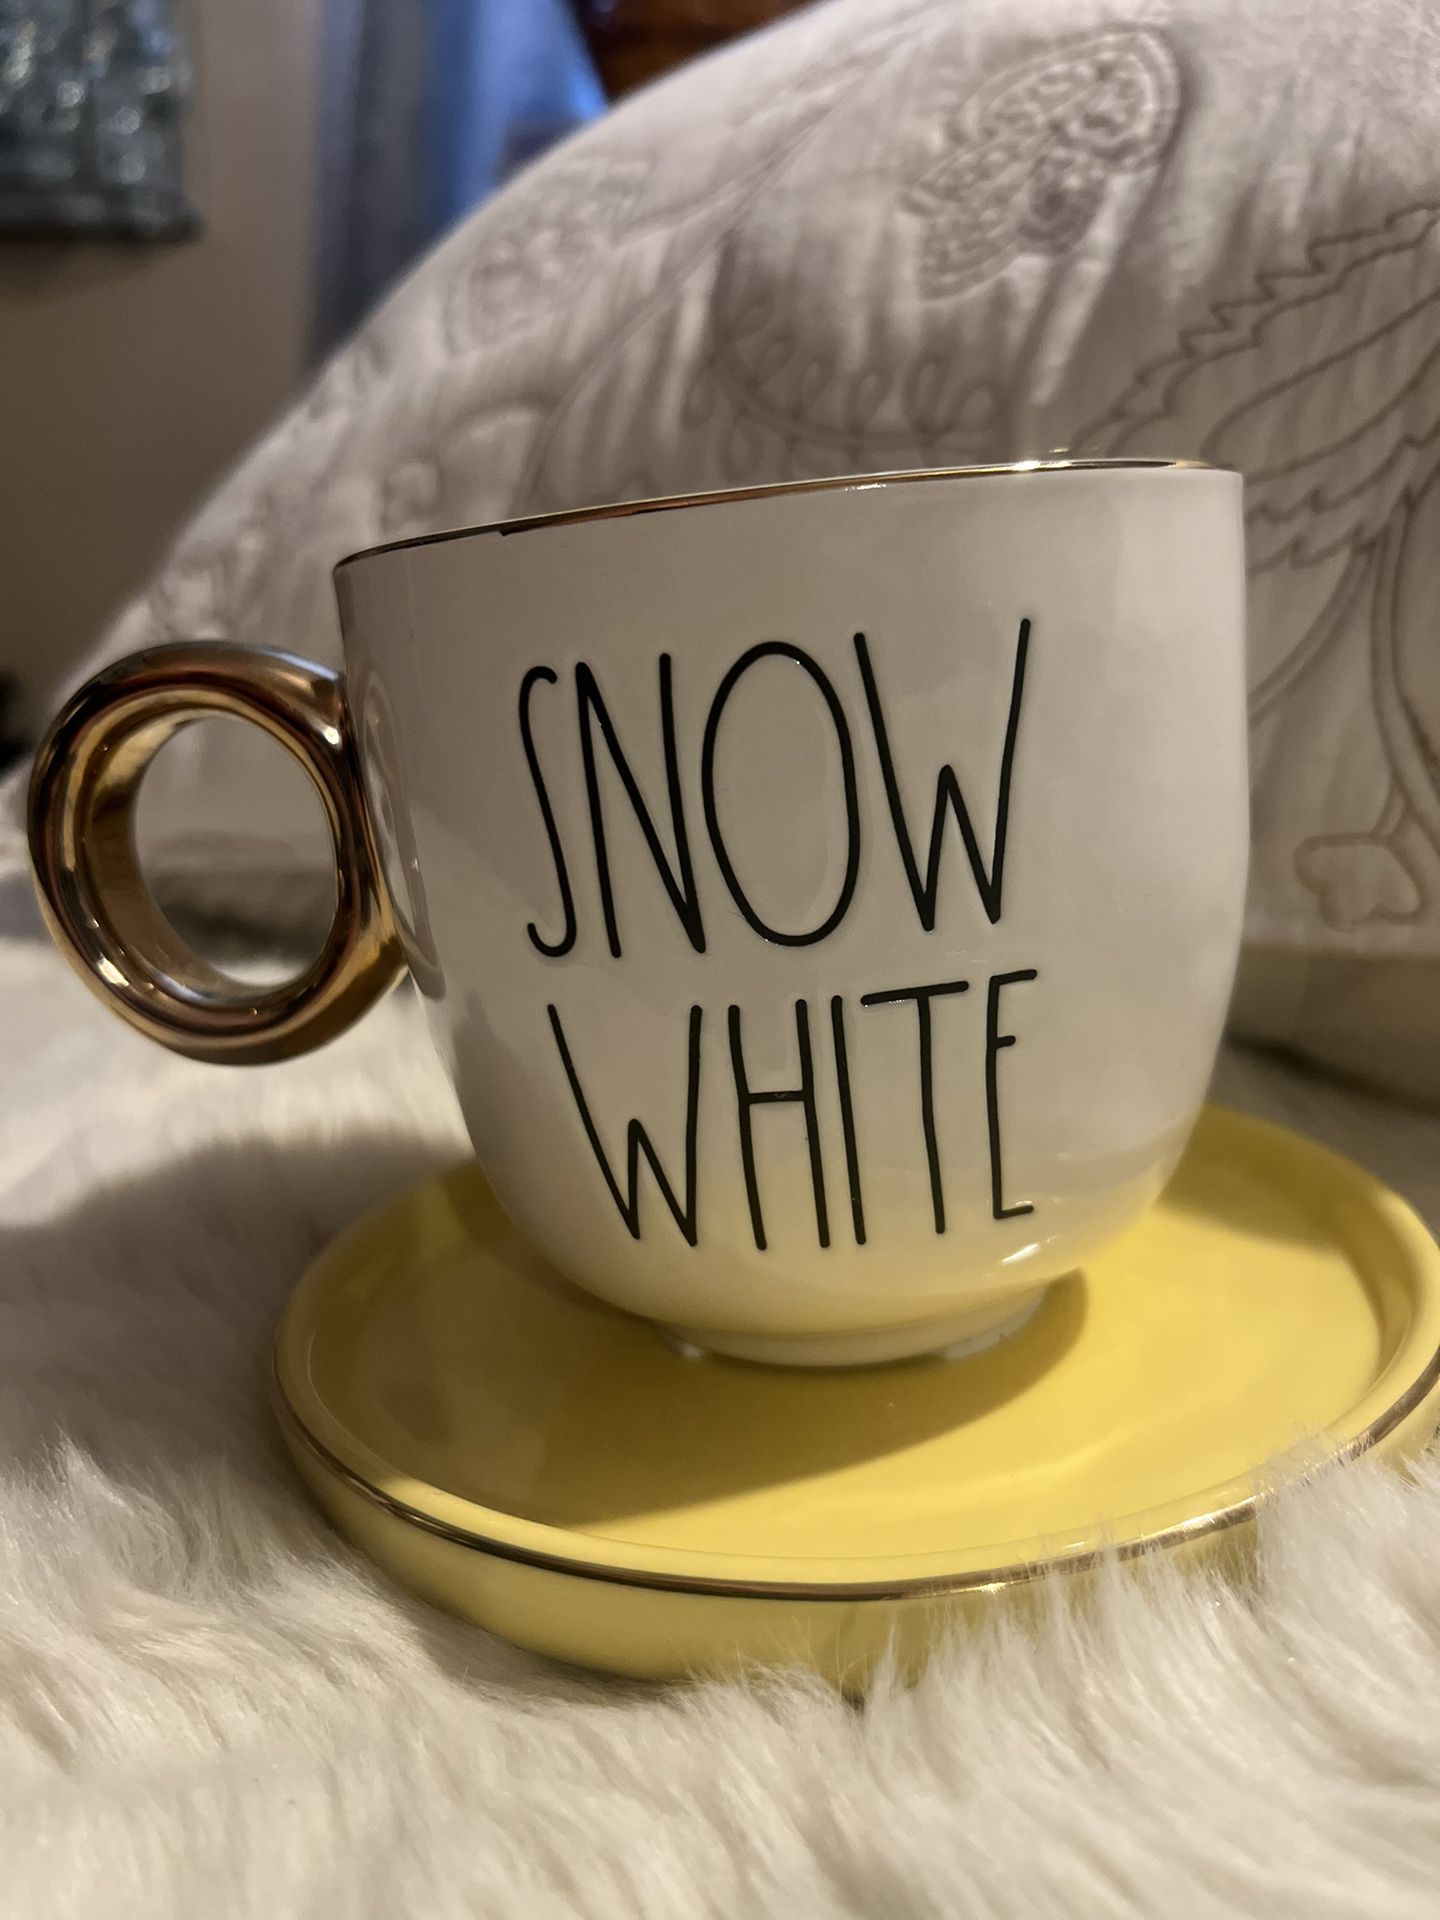 Snow White Cup and Saucer Rae Dunn